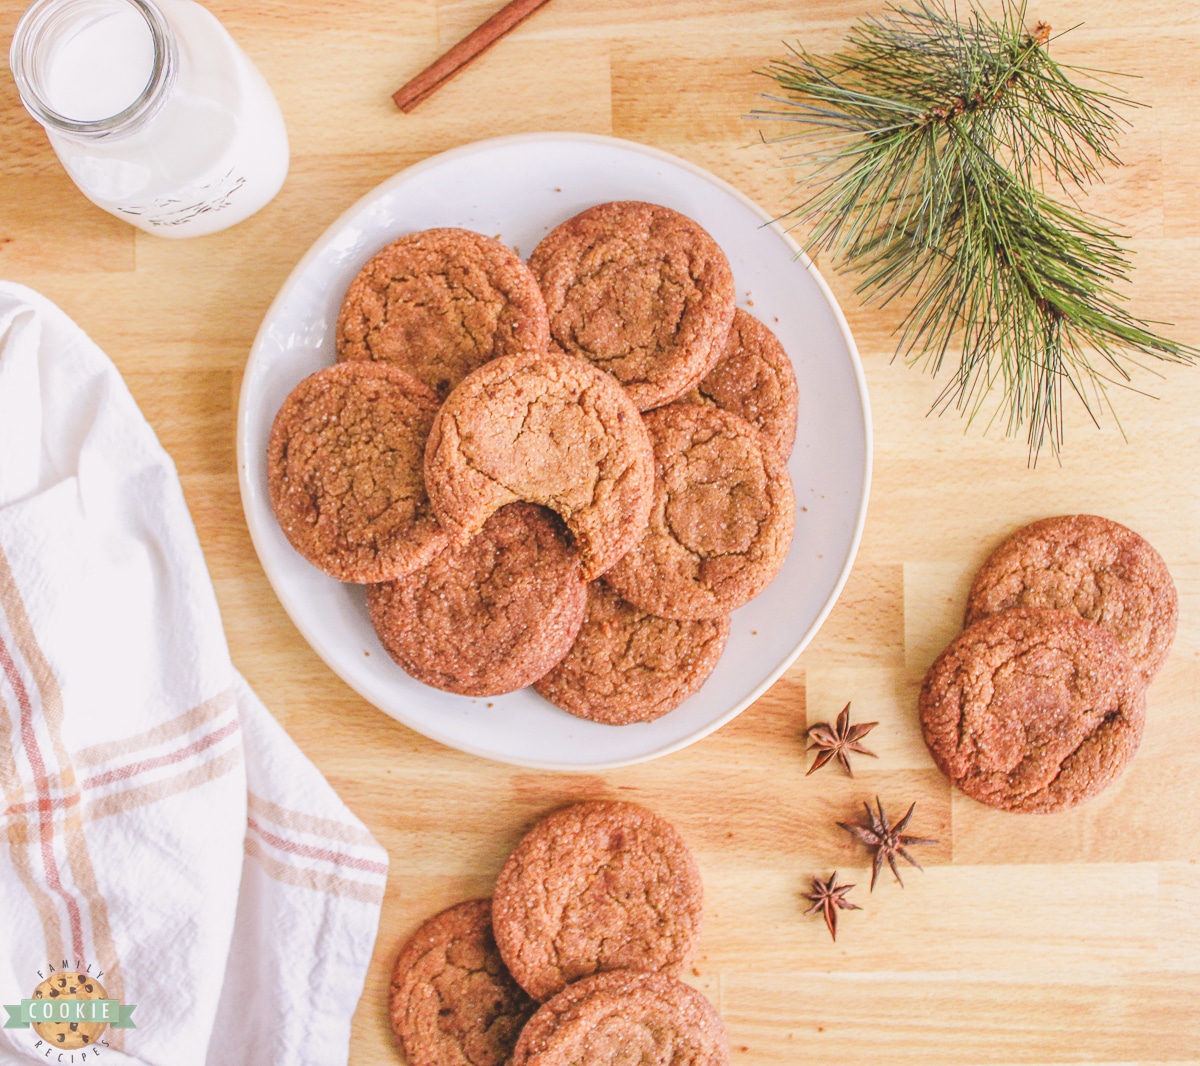 old fashioned gingersnap cookies